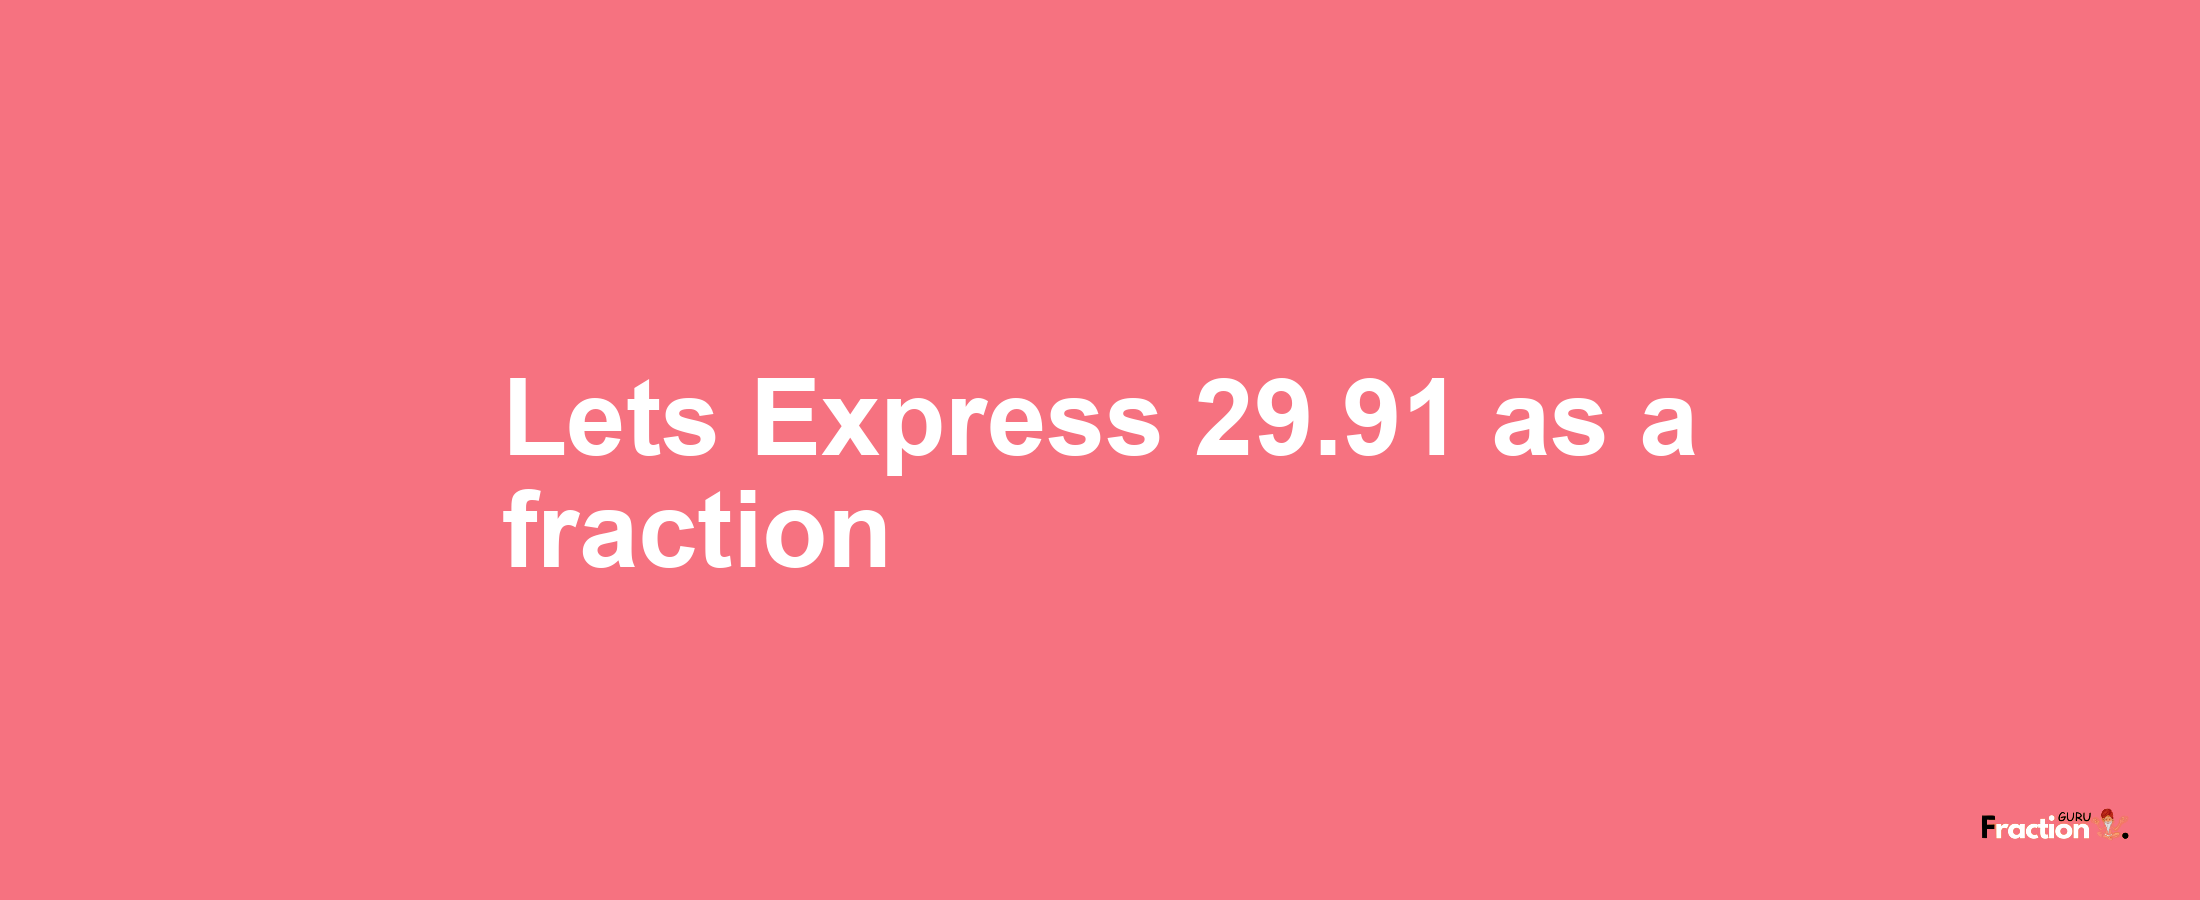 Lets Express 29.91 as afraction